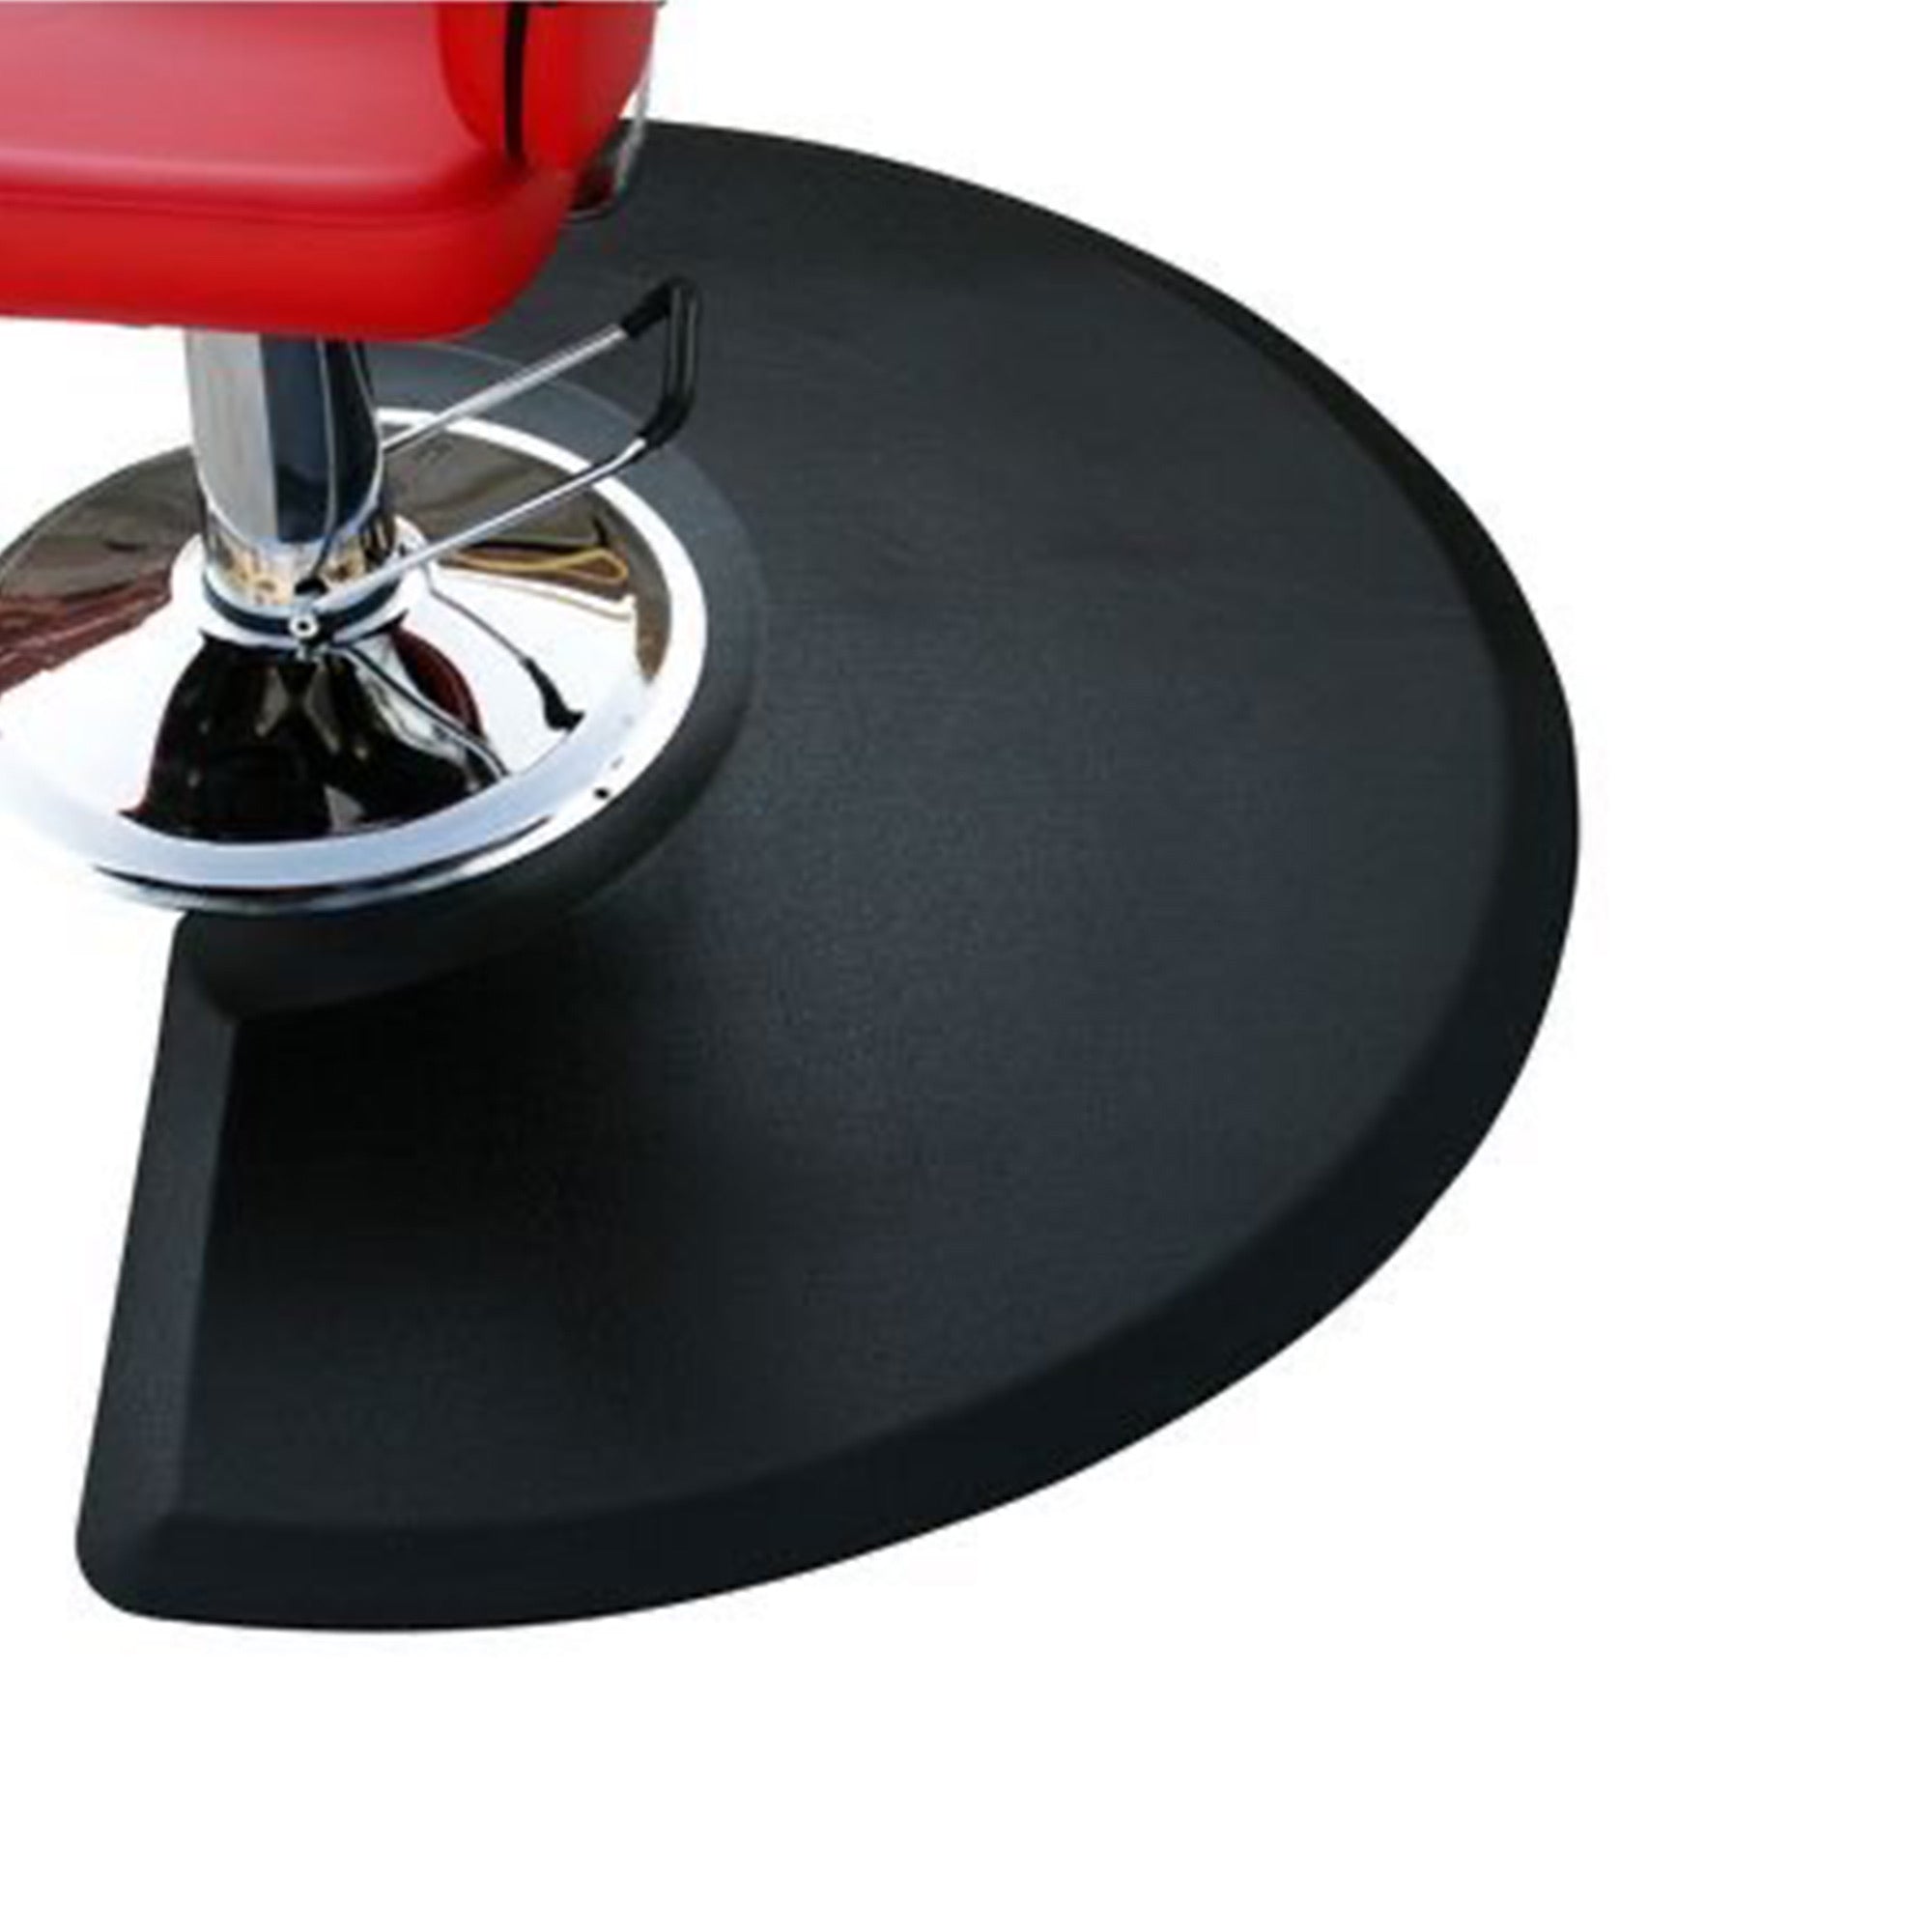 Eson - Barber Tool Mat For Chair Anti-Fatigue